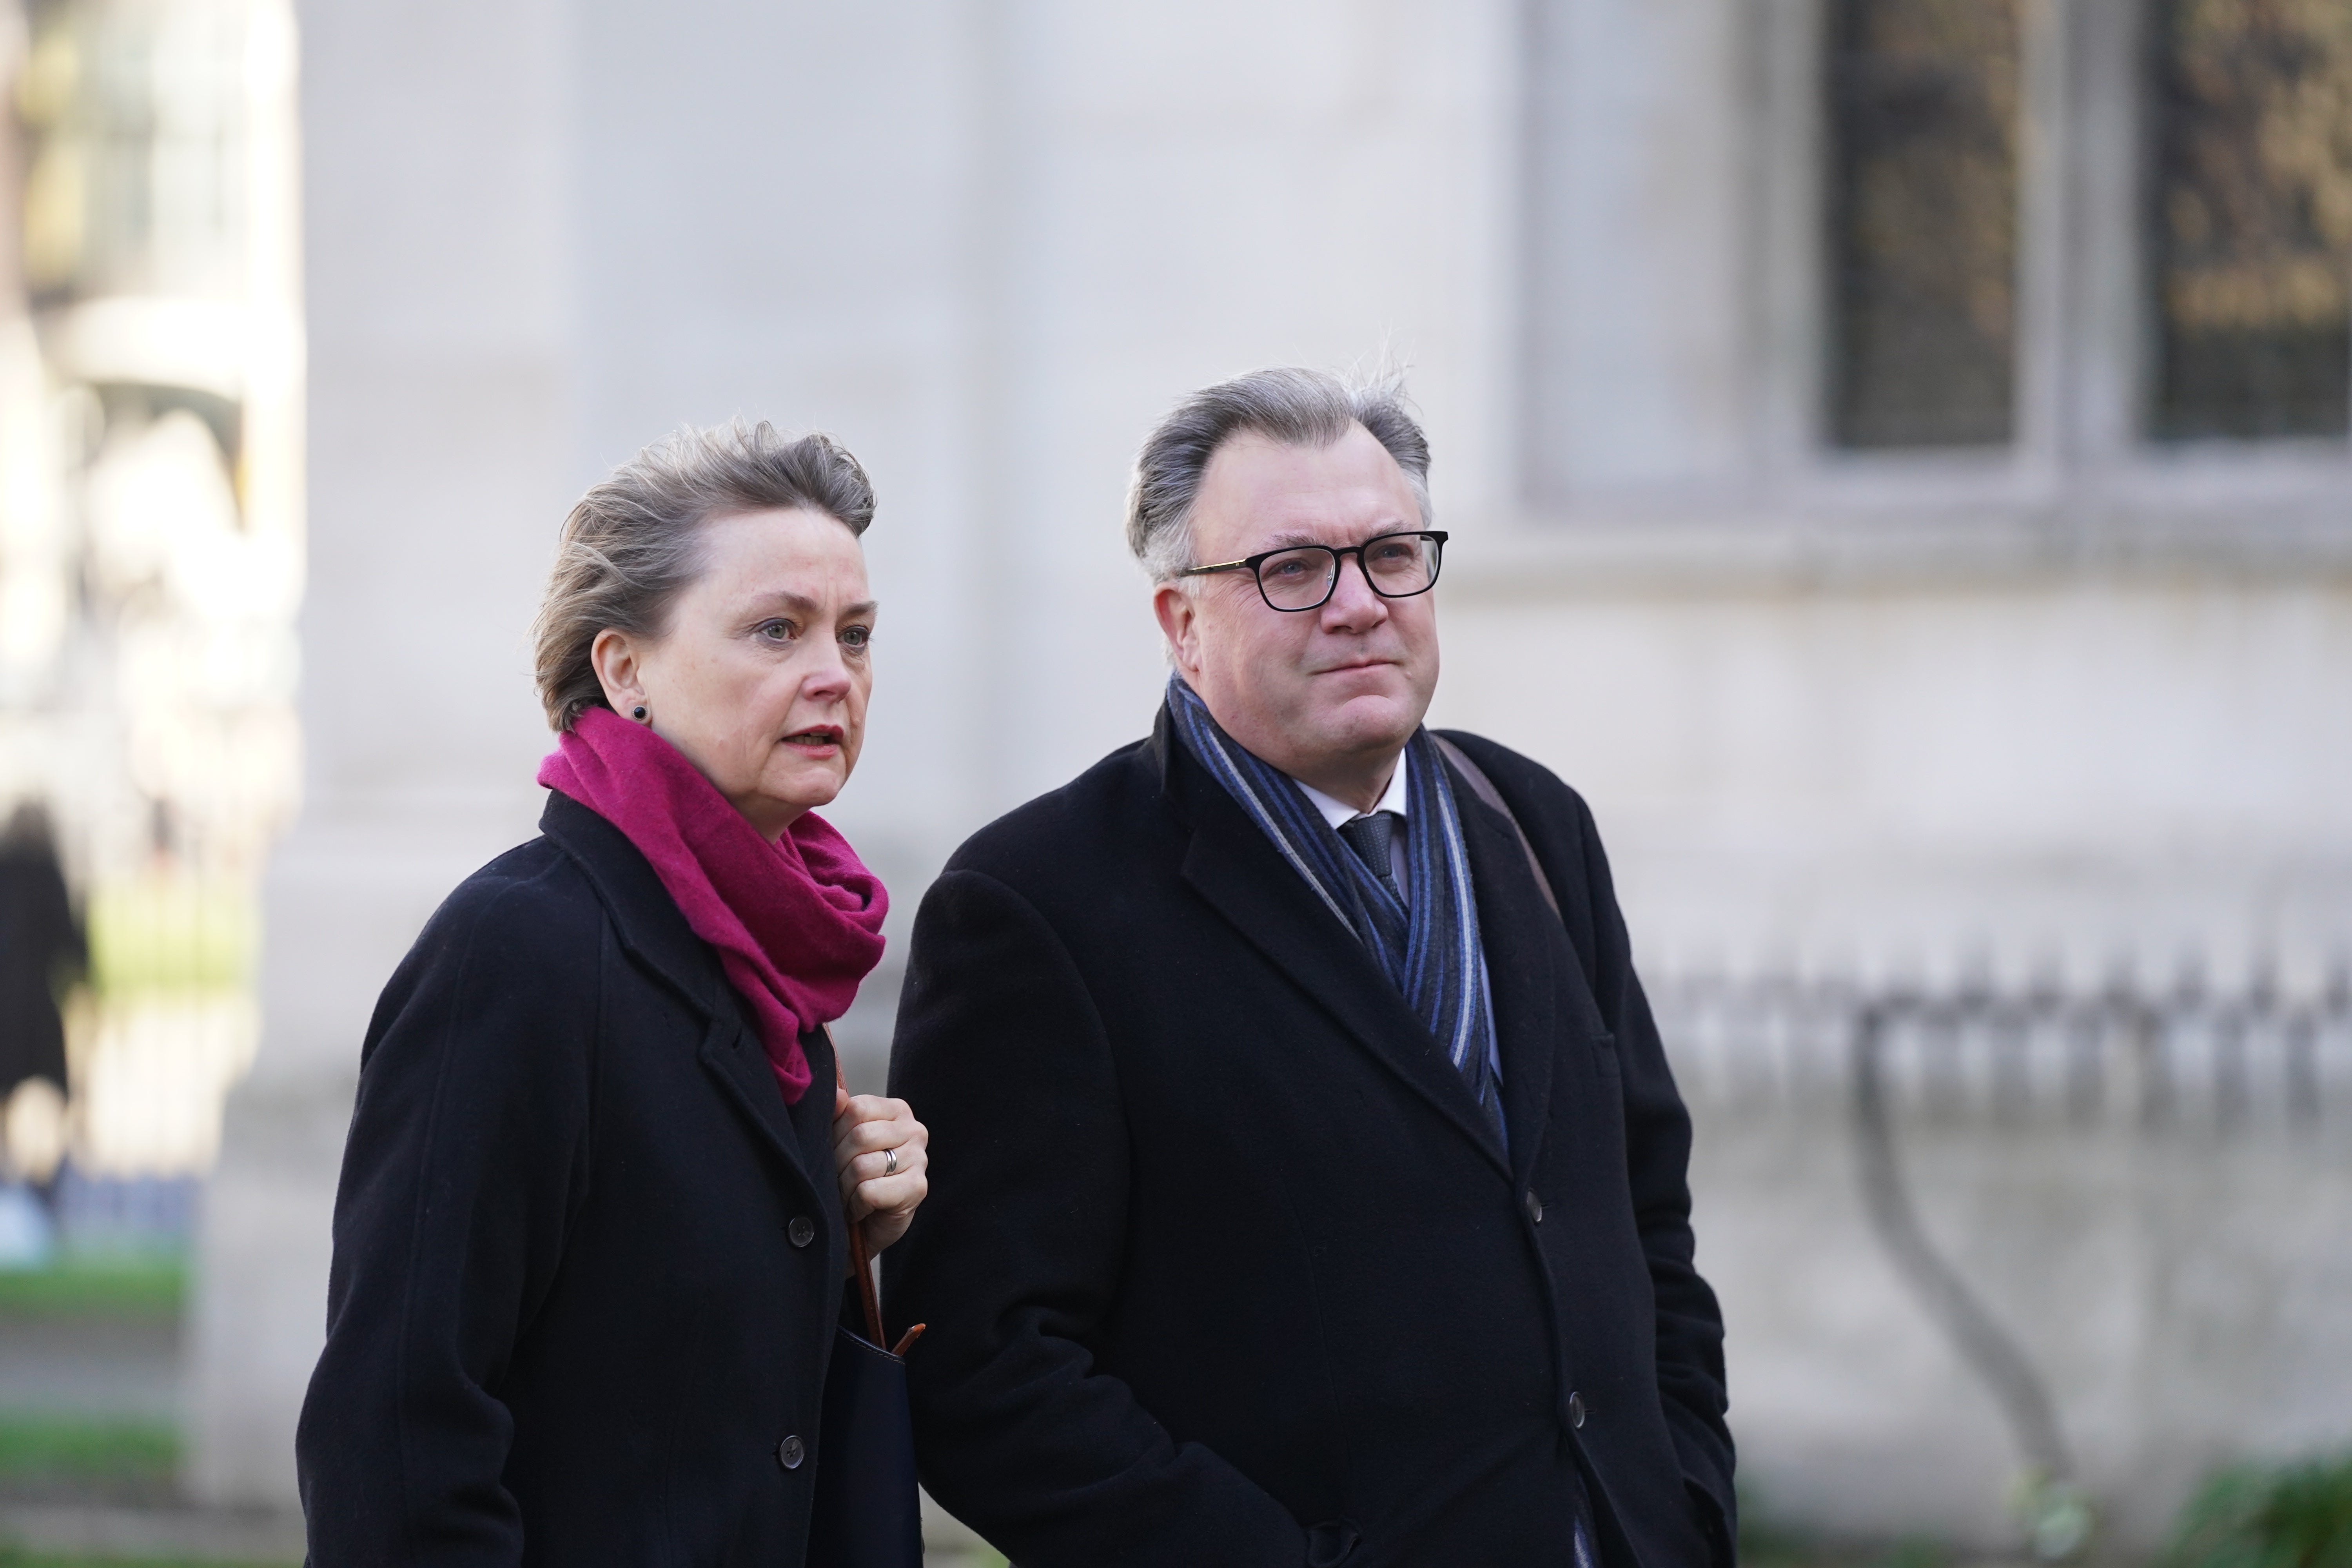 Ed Balls and Yvette Coooper arrive for the funeral of Labour MP Jack Dromey (Stefan Rousseau/PA)